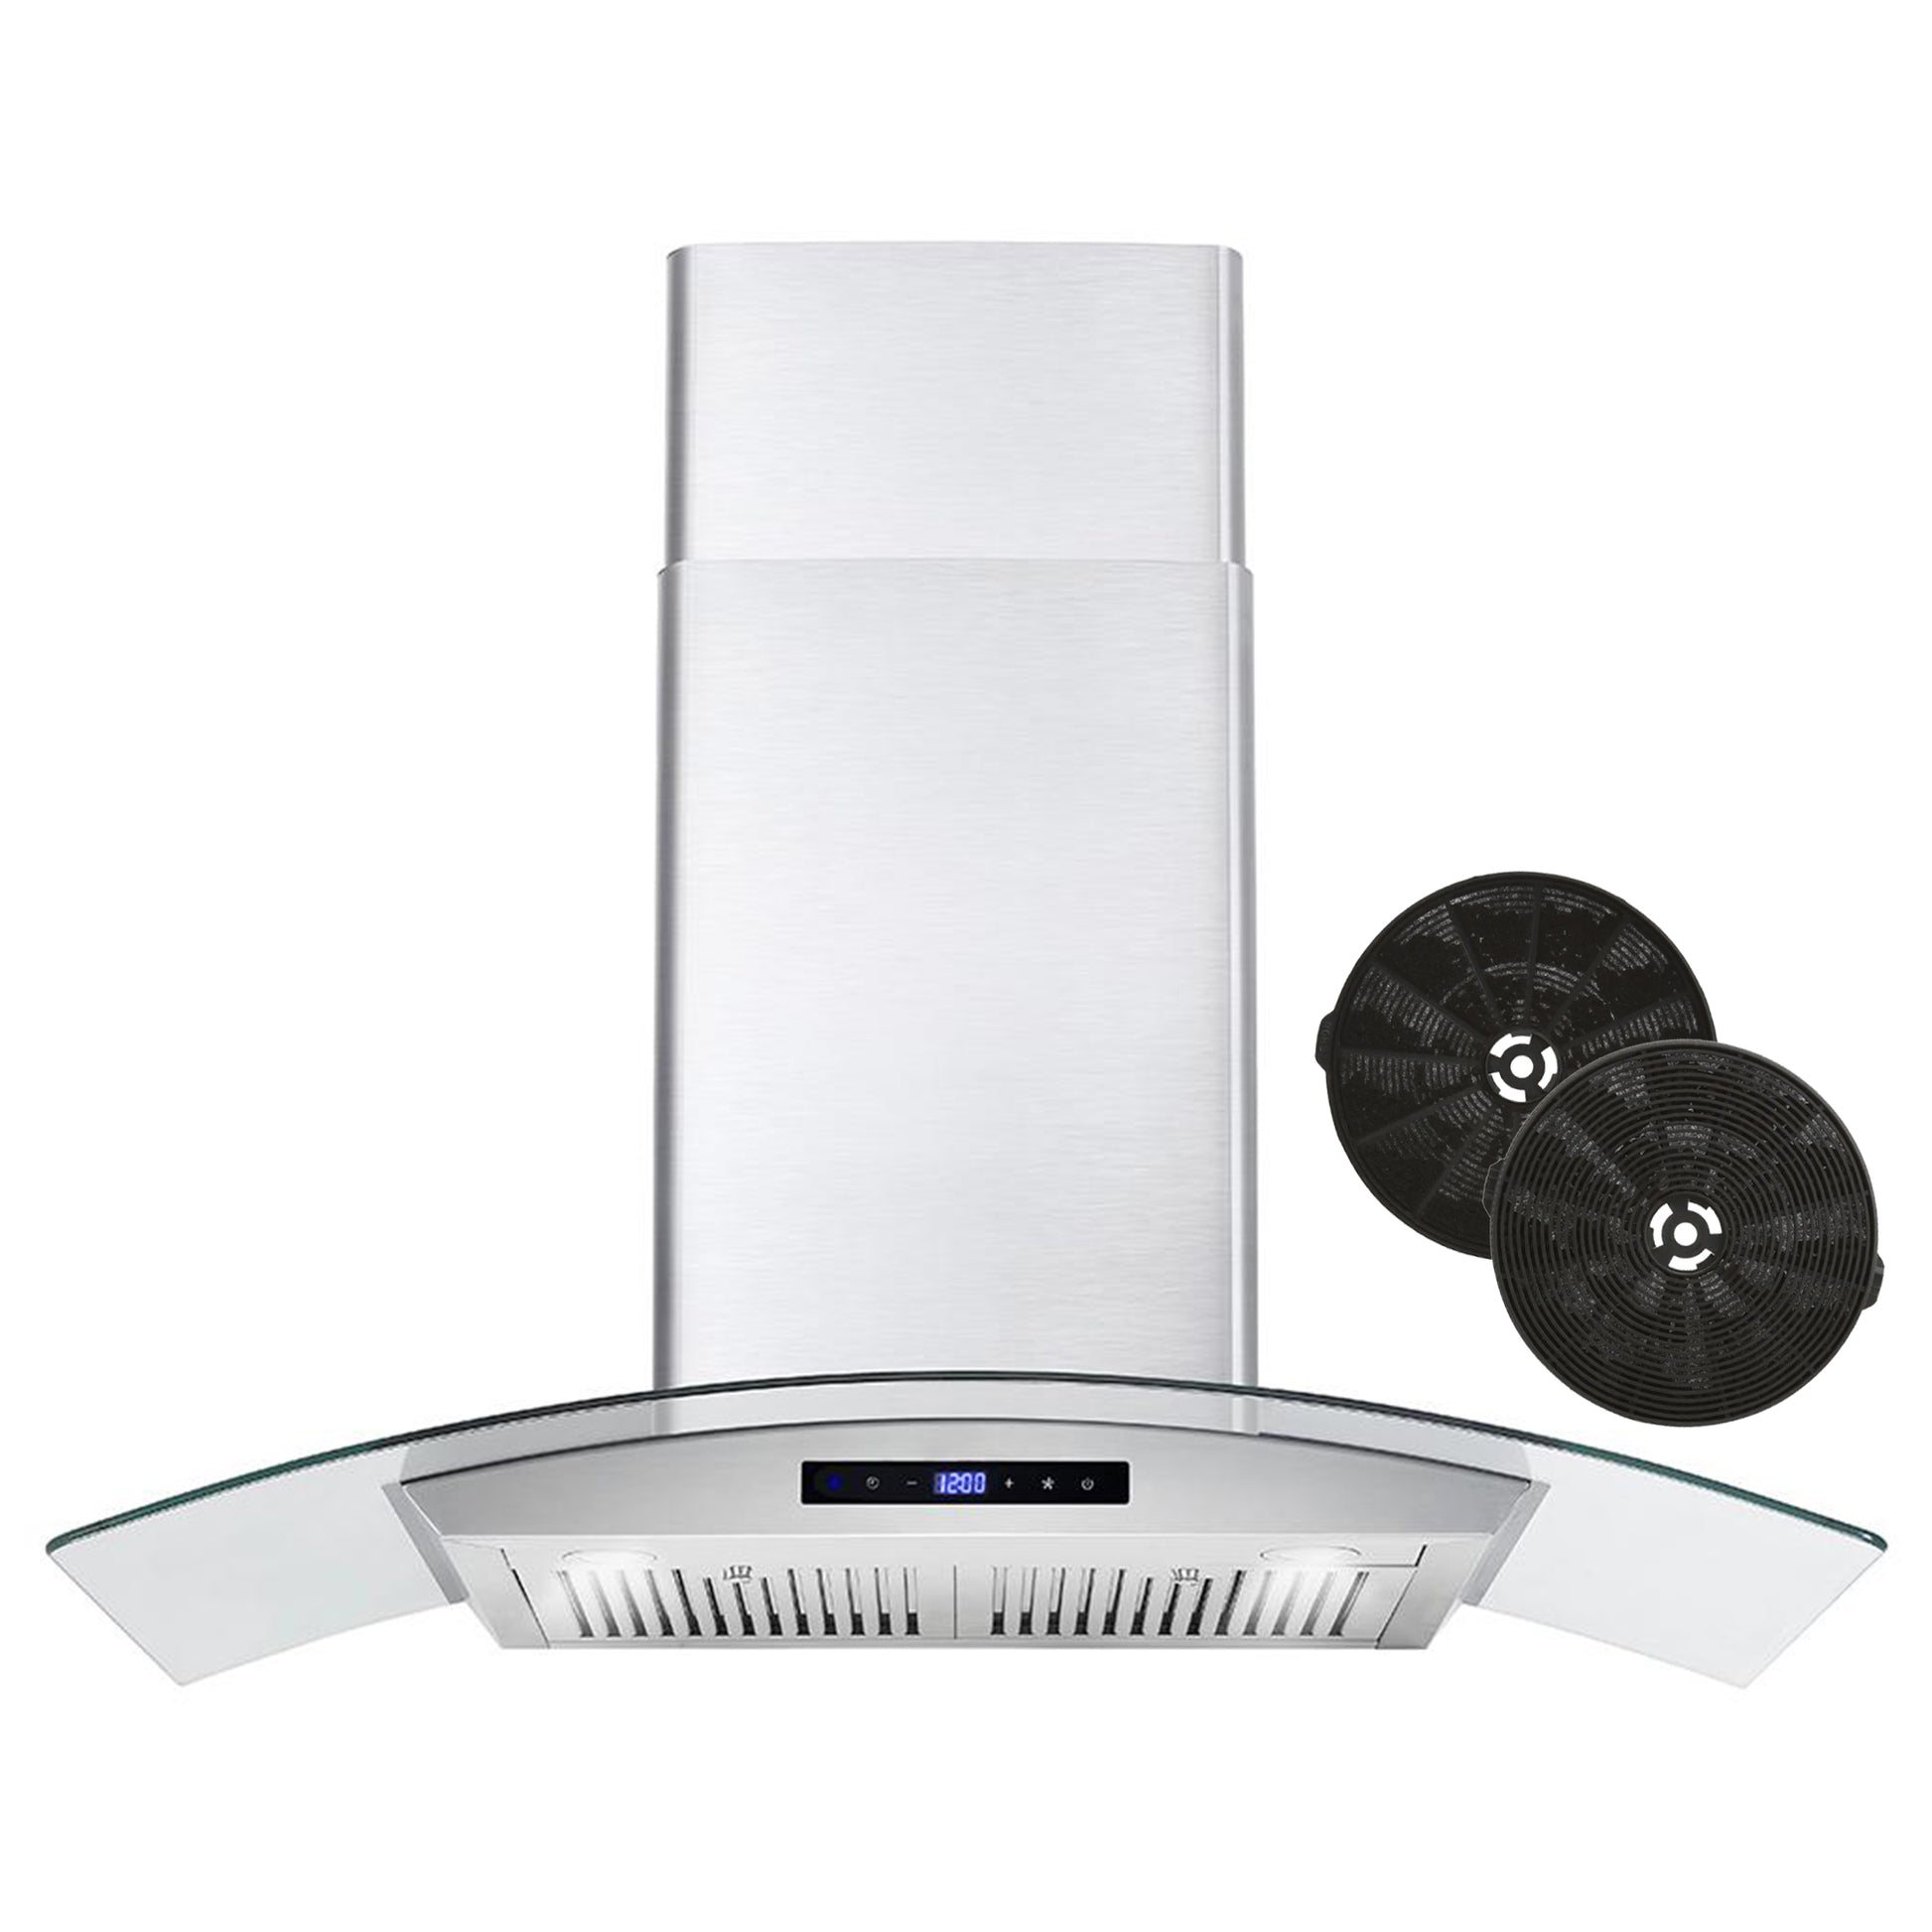 Cosmo 36 in. Stainless Steel Ducted Wall Mount Range Hood with Touch Controls 380 CFM